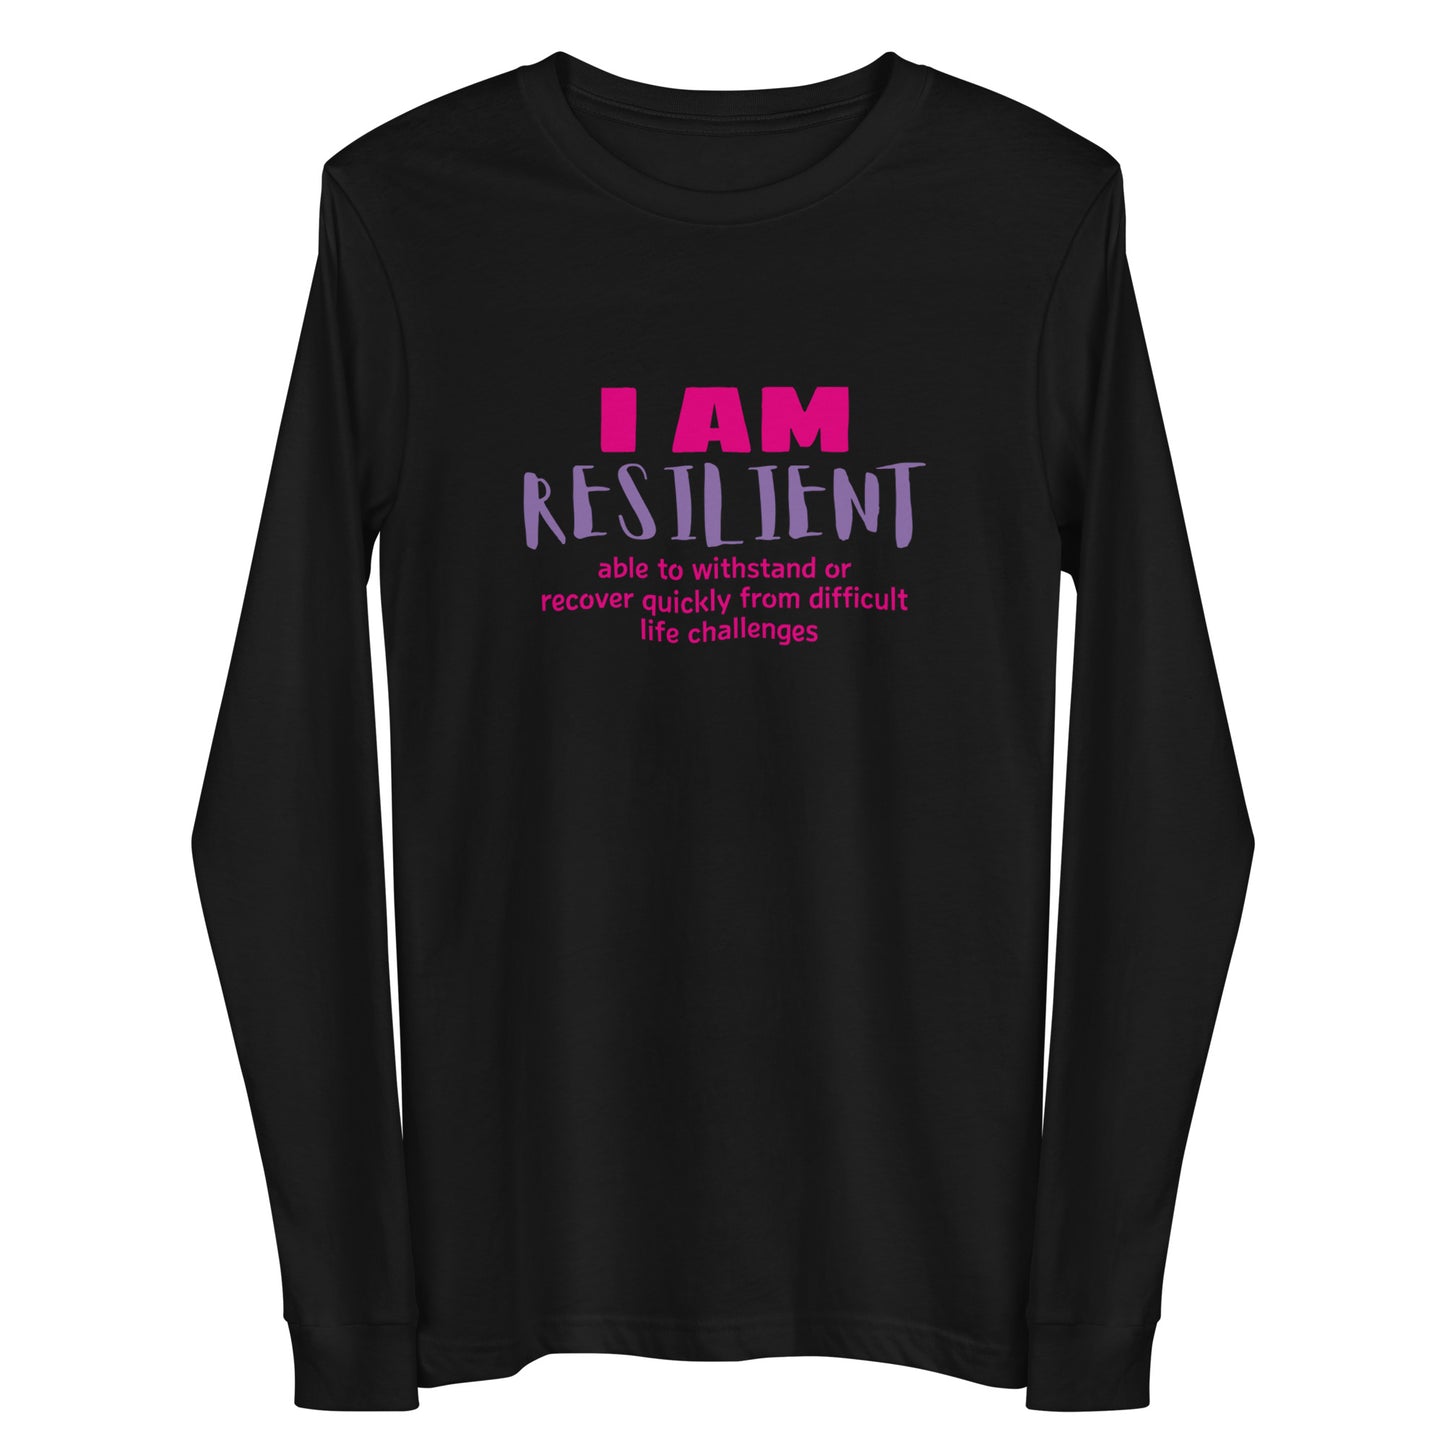 I AM Resilient Long Sleeve T-Shirt